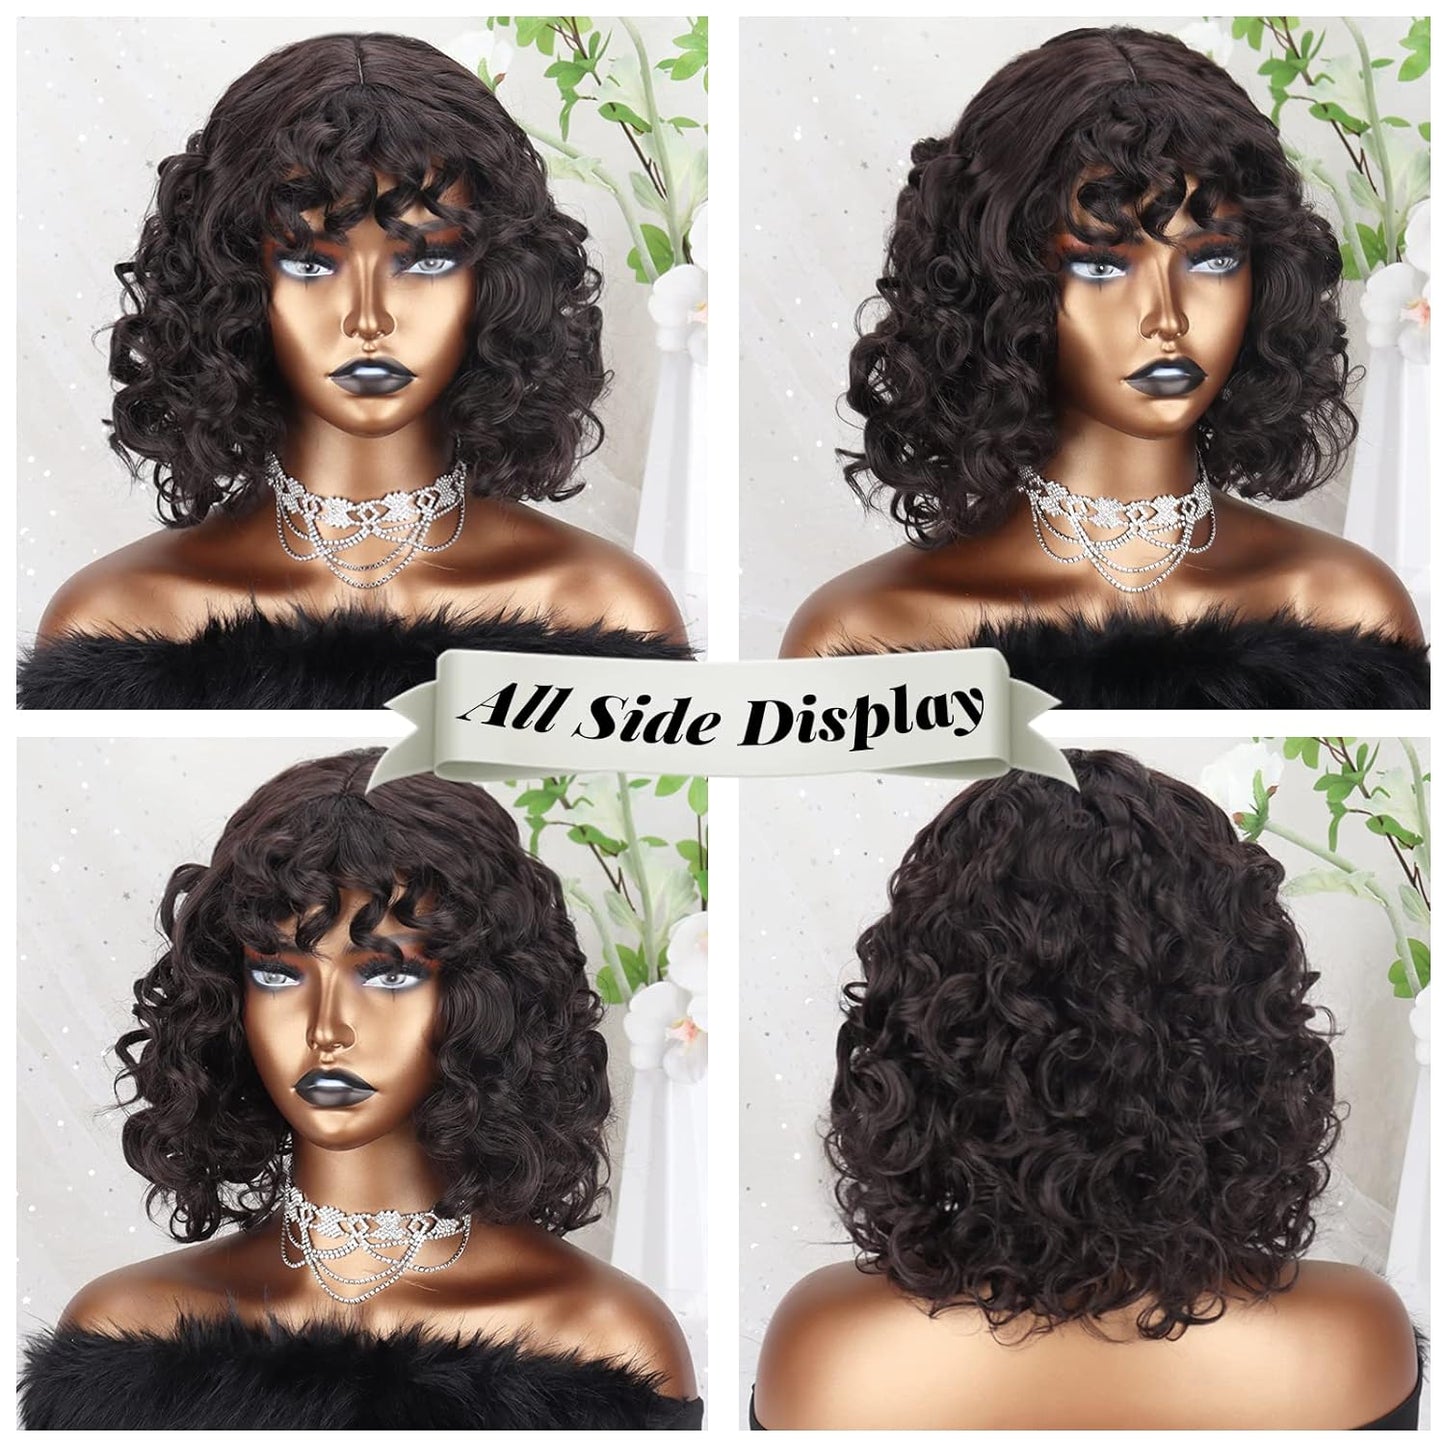 14 inch Blonde Curly Wigs 70s, Kinky Brown Mixd Blonde Afro Wigs for Black Women, Synthetic Afro Curly Blonde Wigs for Women (Brown to Blonde)